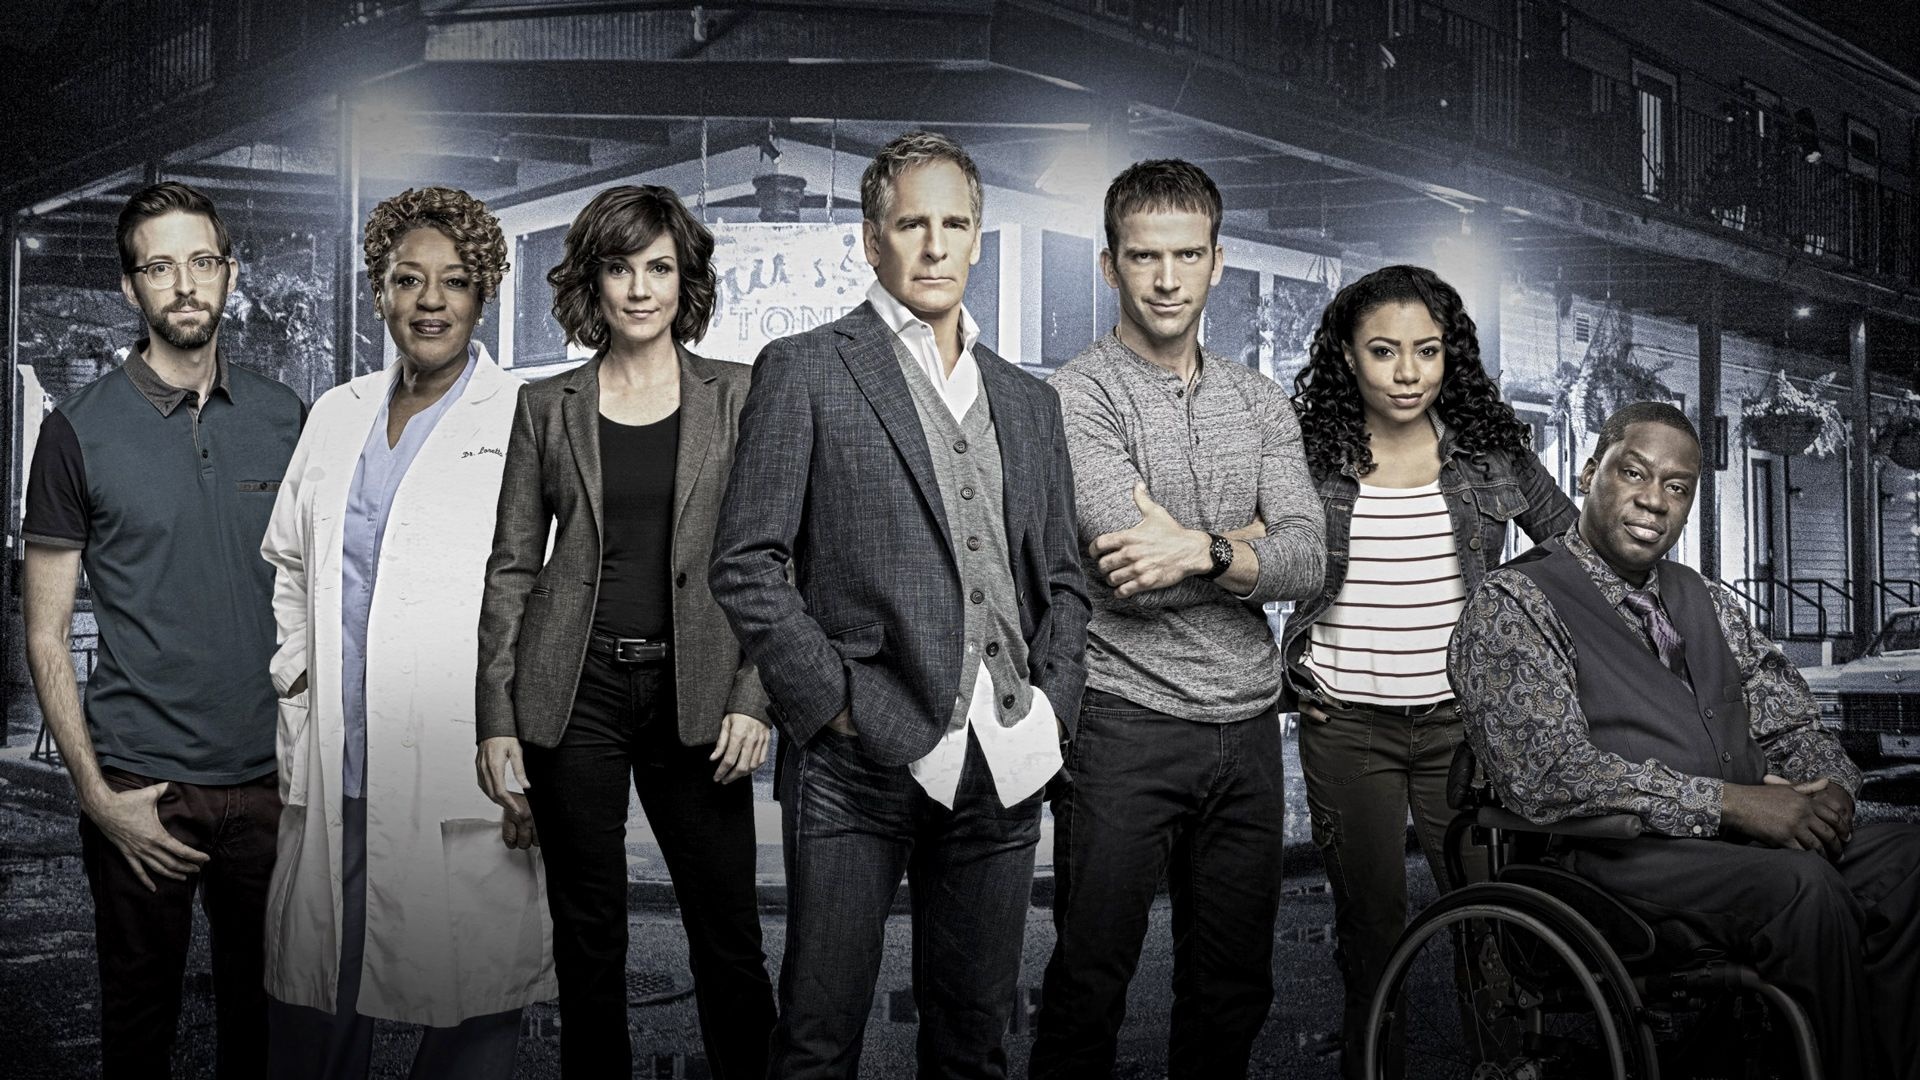 NCIS: New Orleans, New NCIS wallpapers, Top free, Backgrounds, 1920x1080 Full HD Desktop